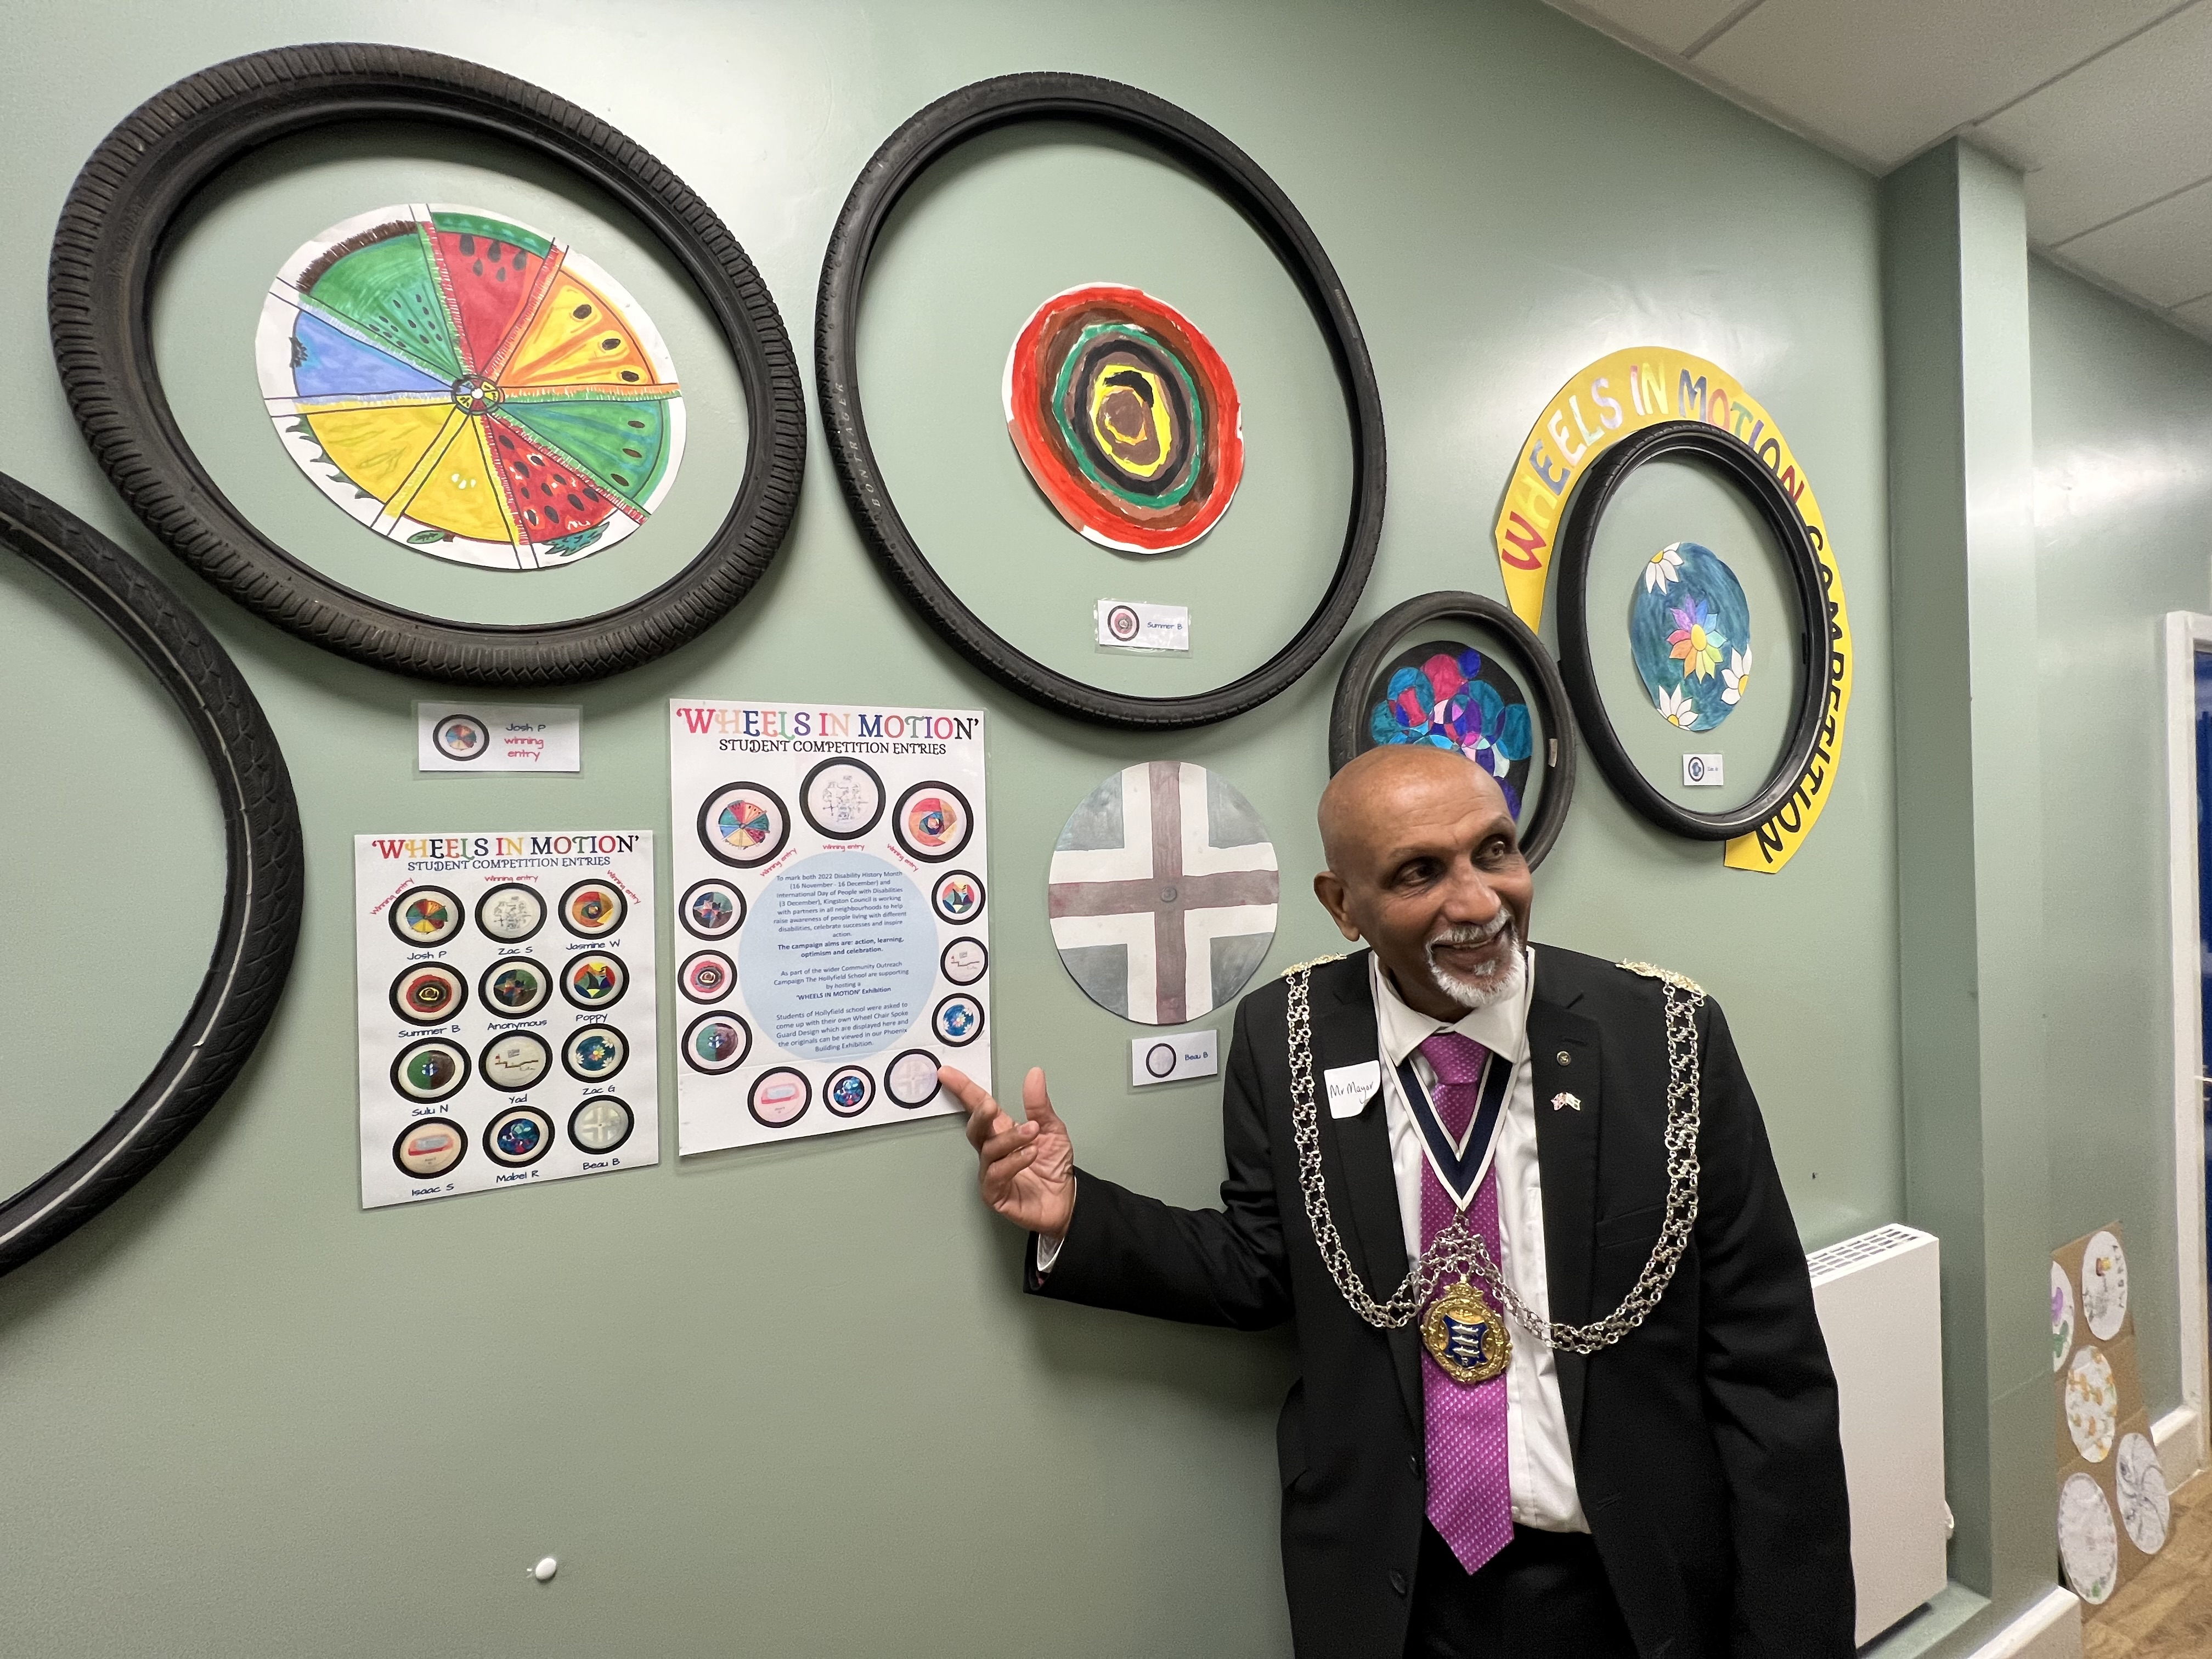 The Mayor of Kingston pointing at artwork on display at a local primary school for UK Disability History Month